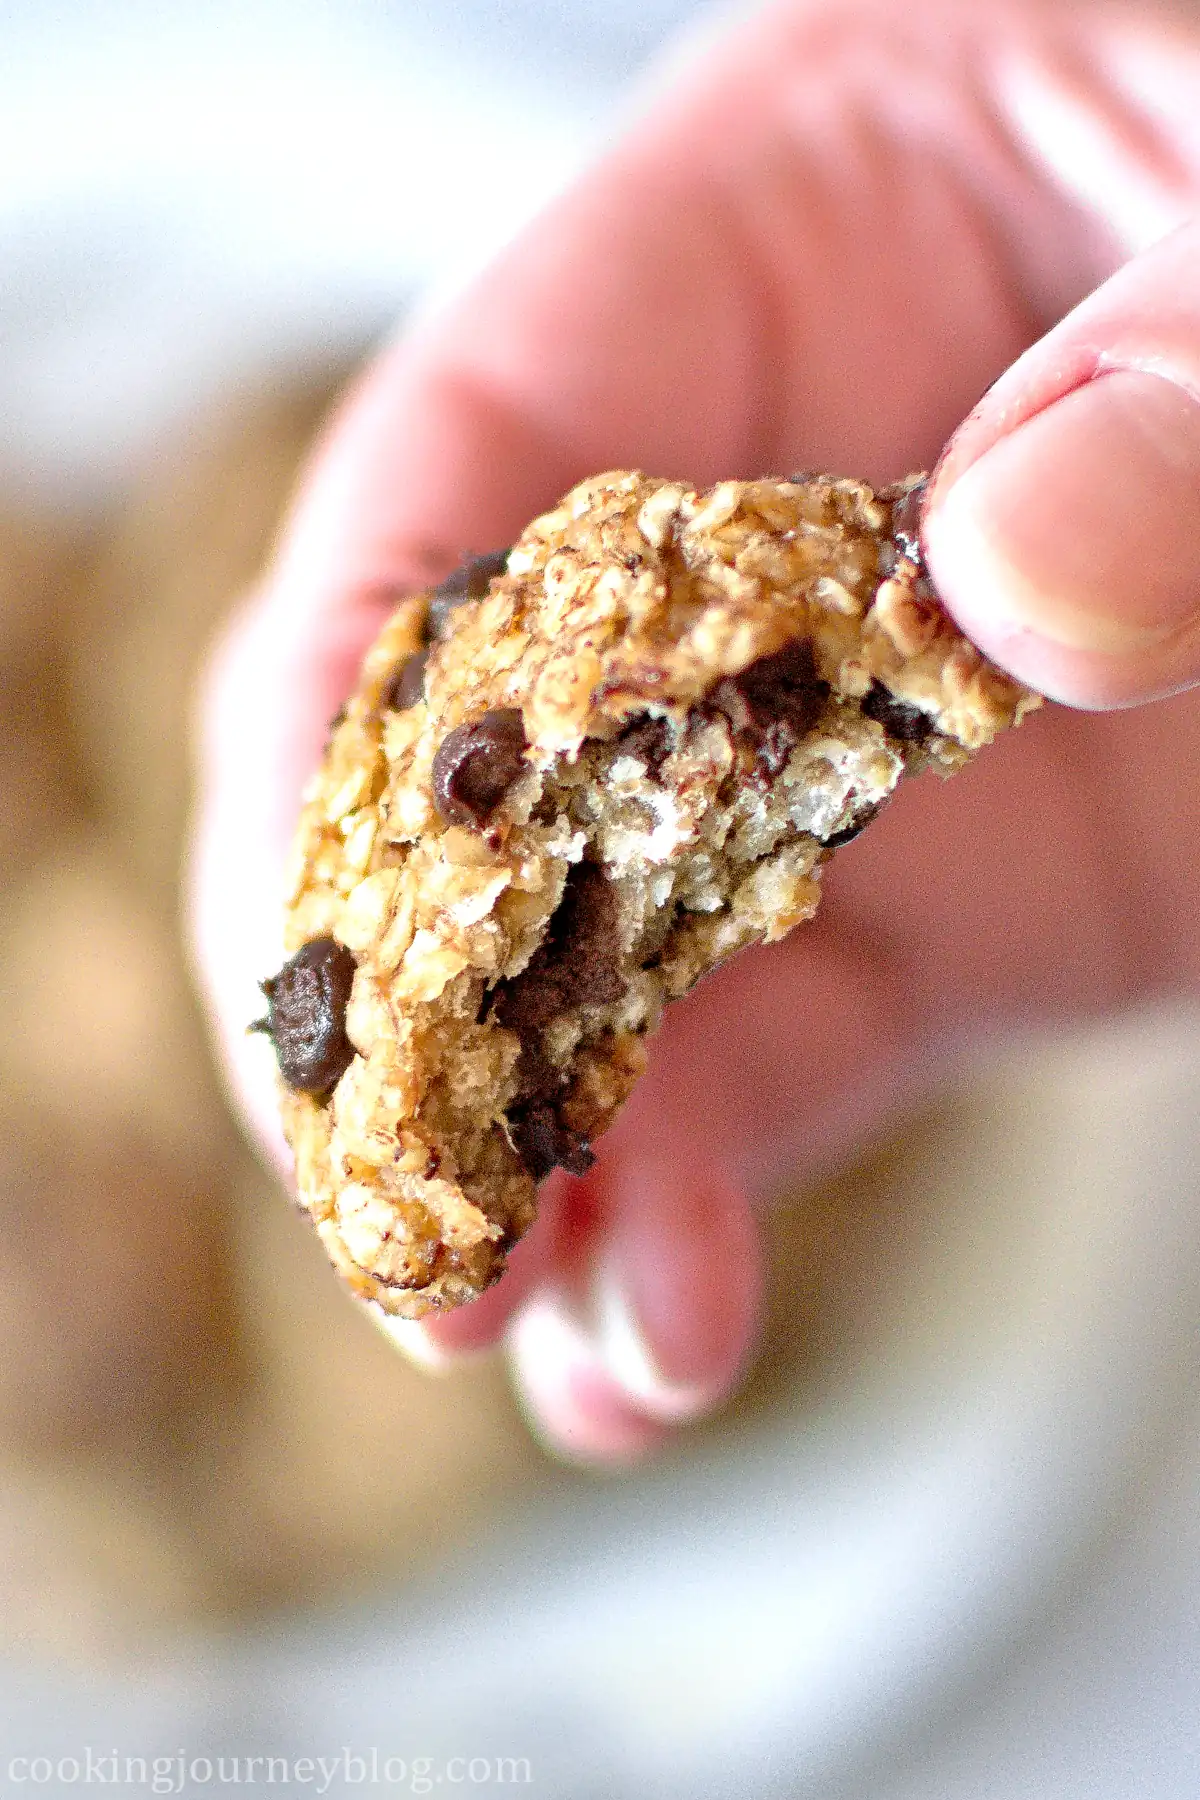 A bite of a 3 Ingredient Oatmeal Banana Cookie in the hand